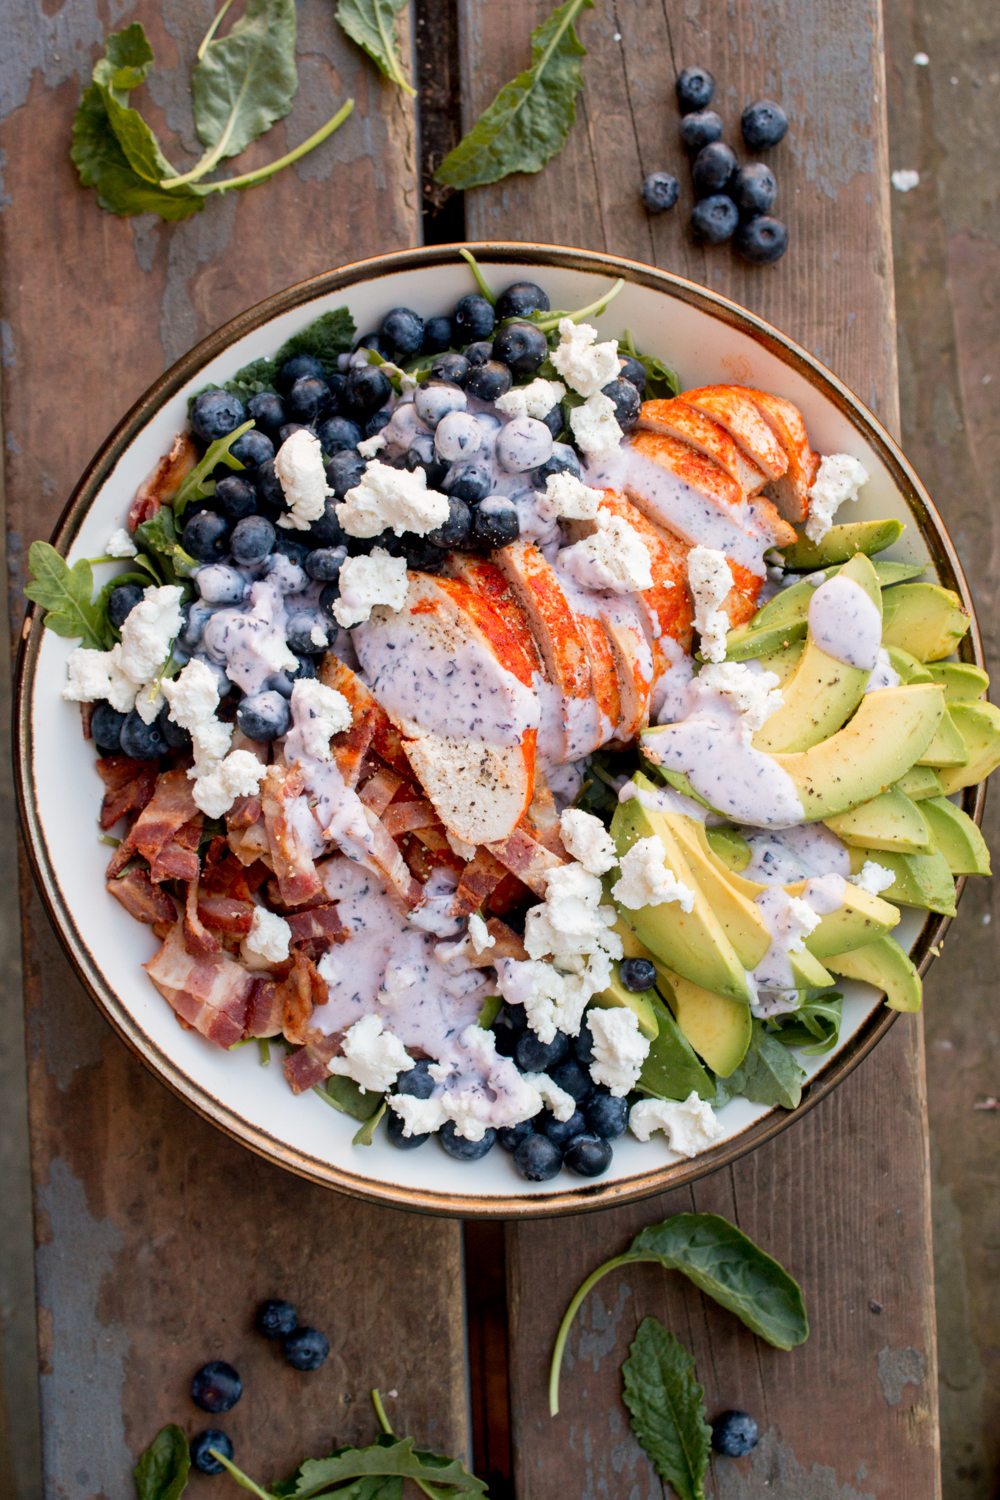 Roast Chicken Salad with Avocado and Blueberries